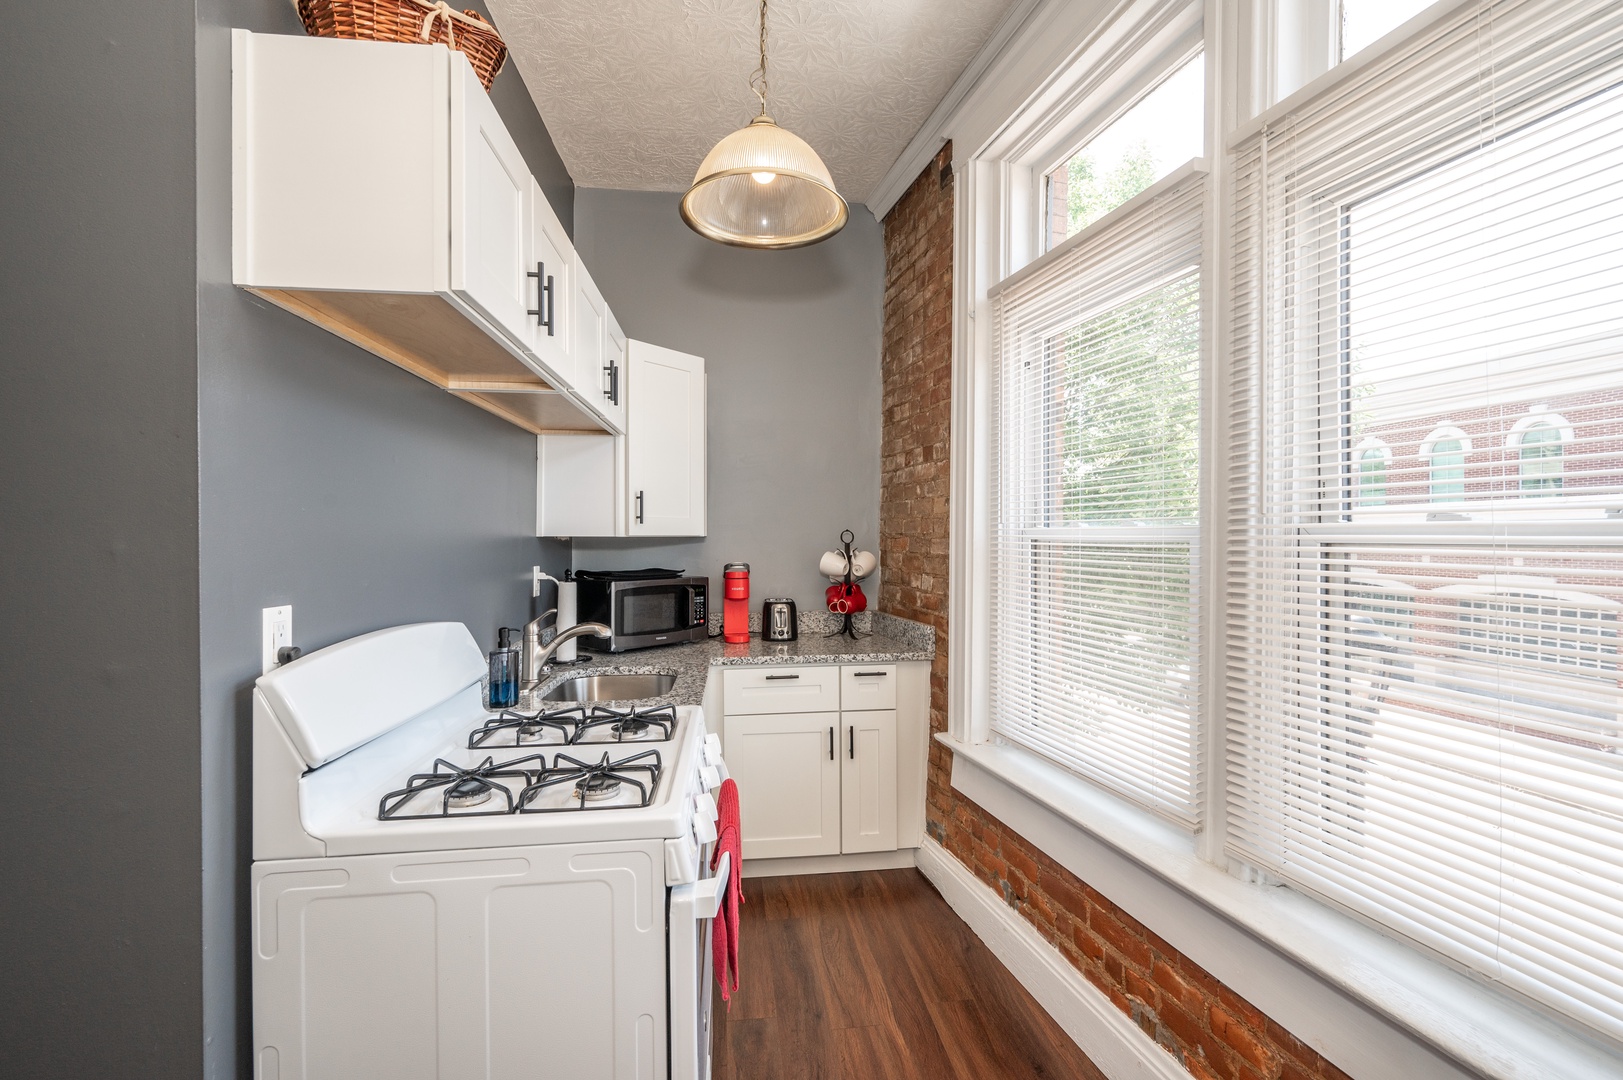 Enjoy the comforts of home & historic exposed brick of the kitchen